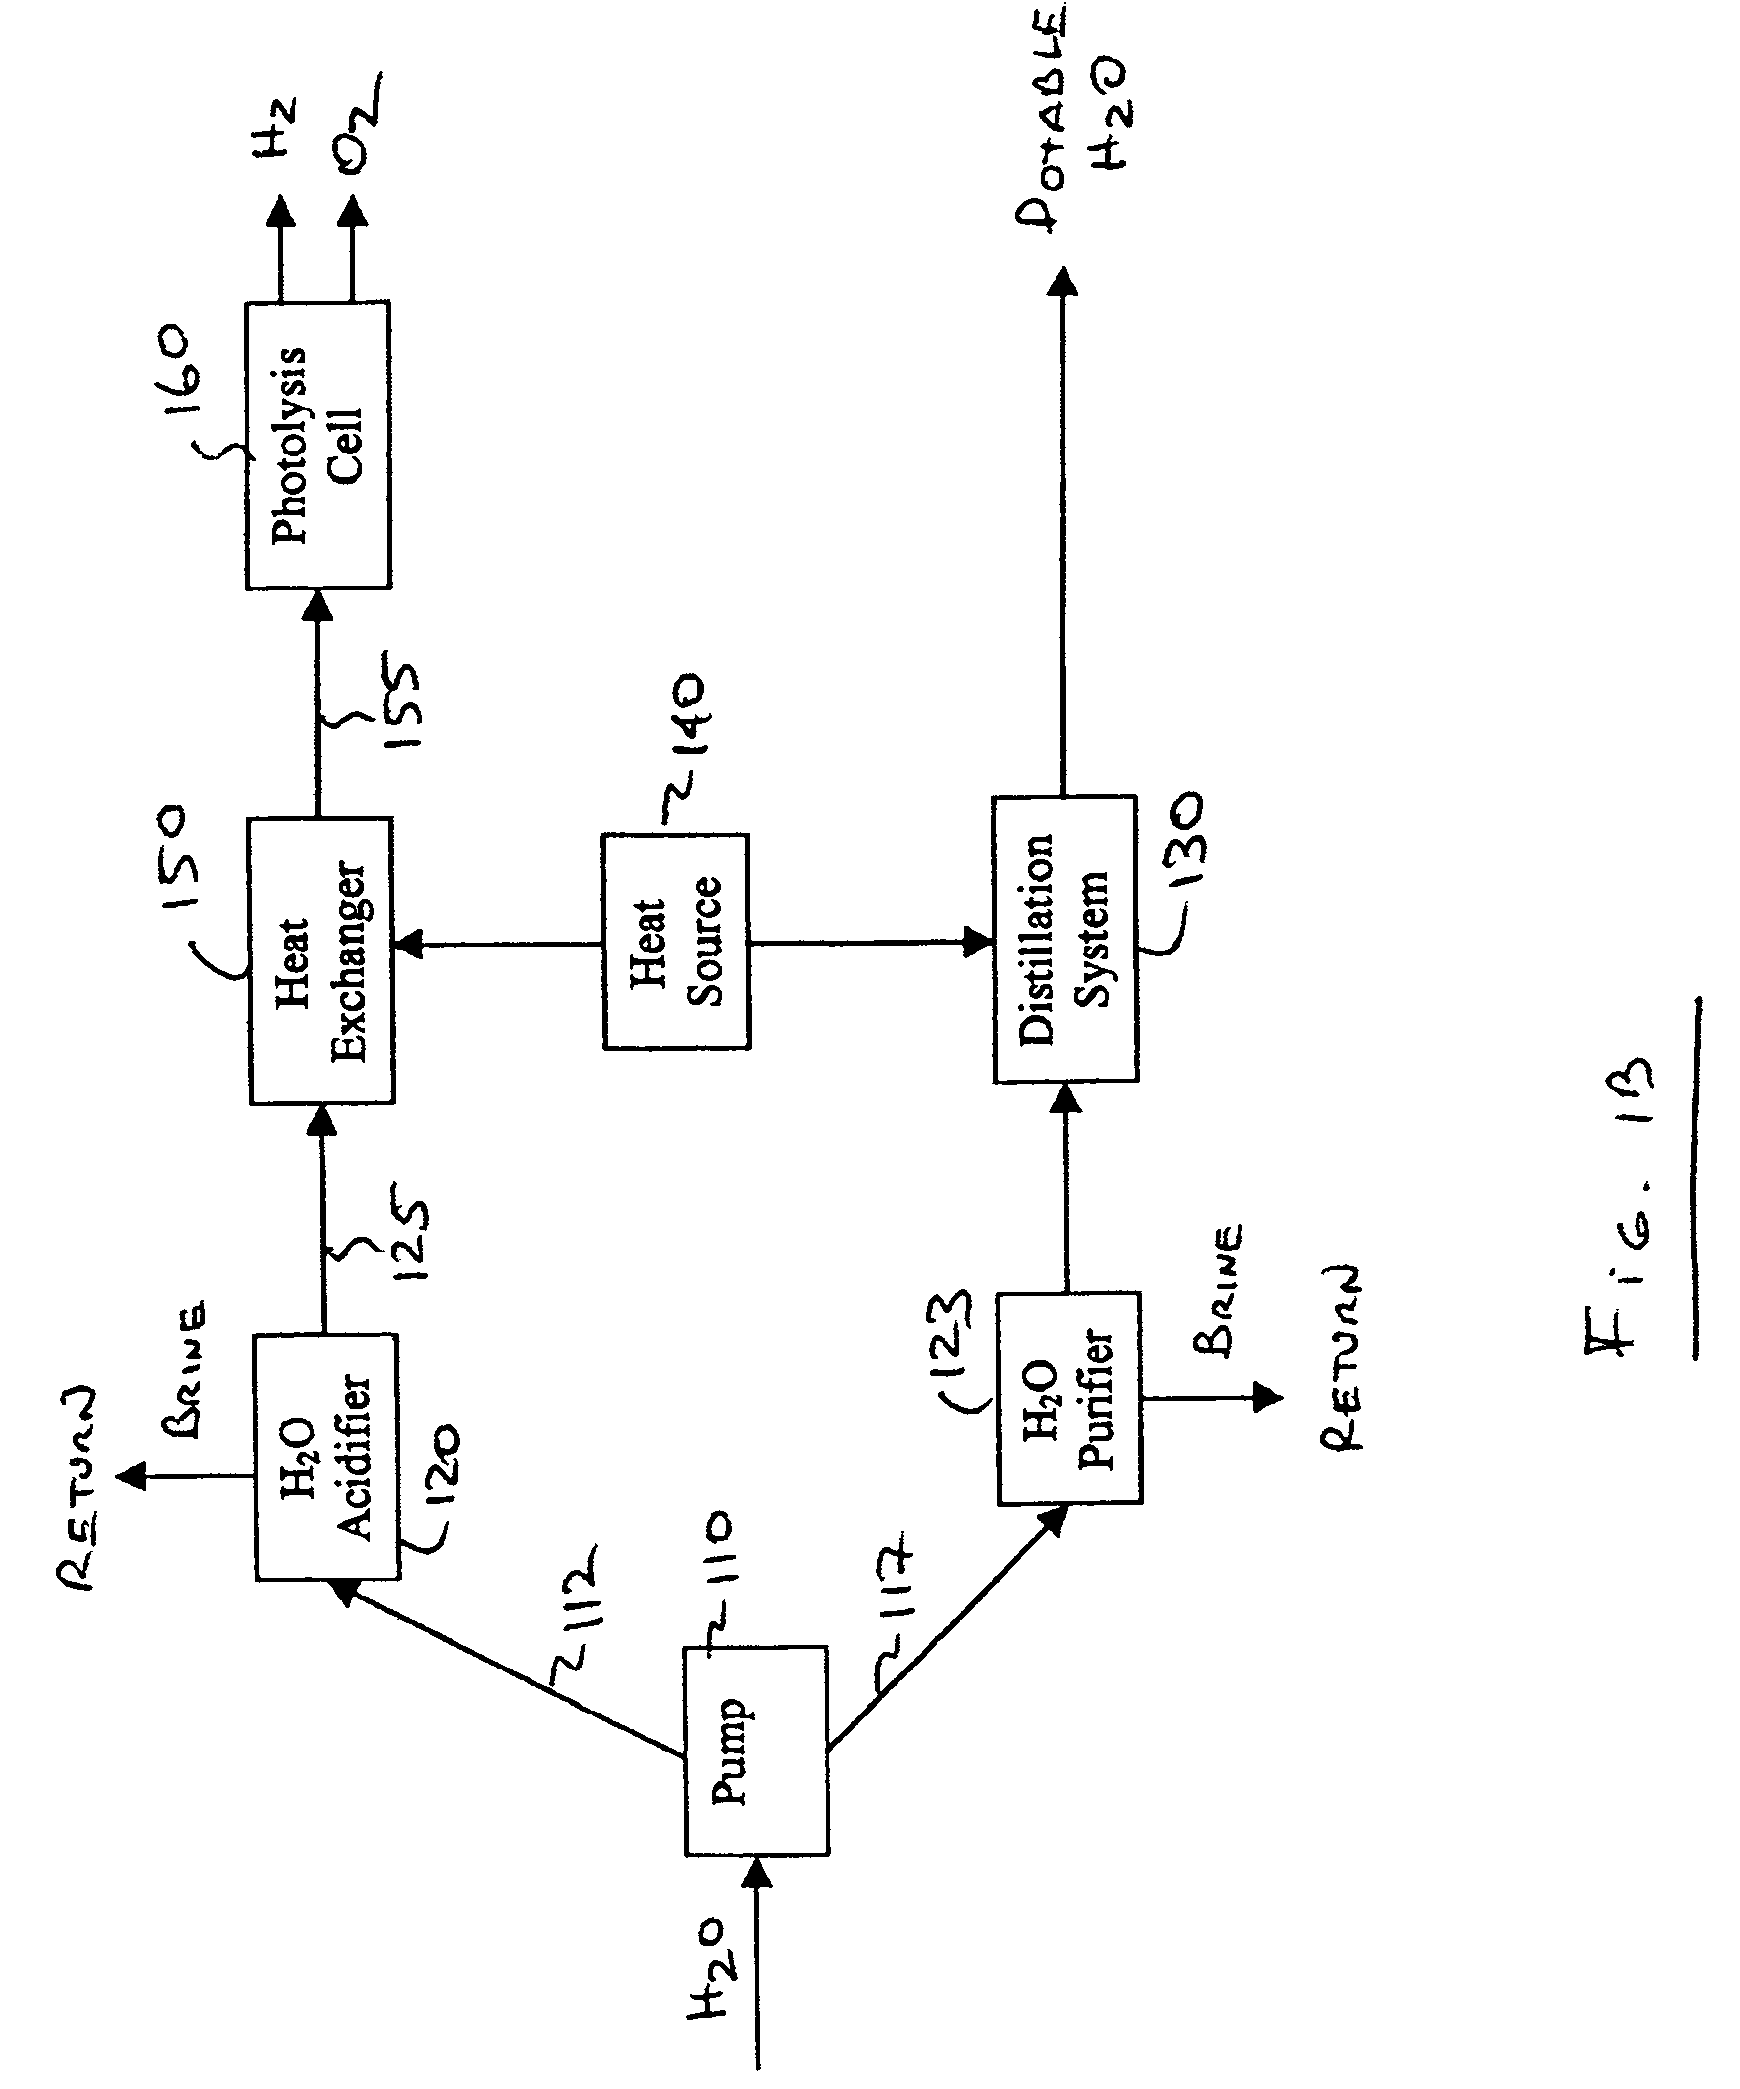 Transition structures and catalytic reaction pathways for the production of hydrogen and oxygen